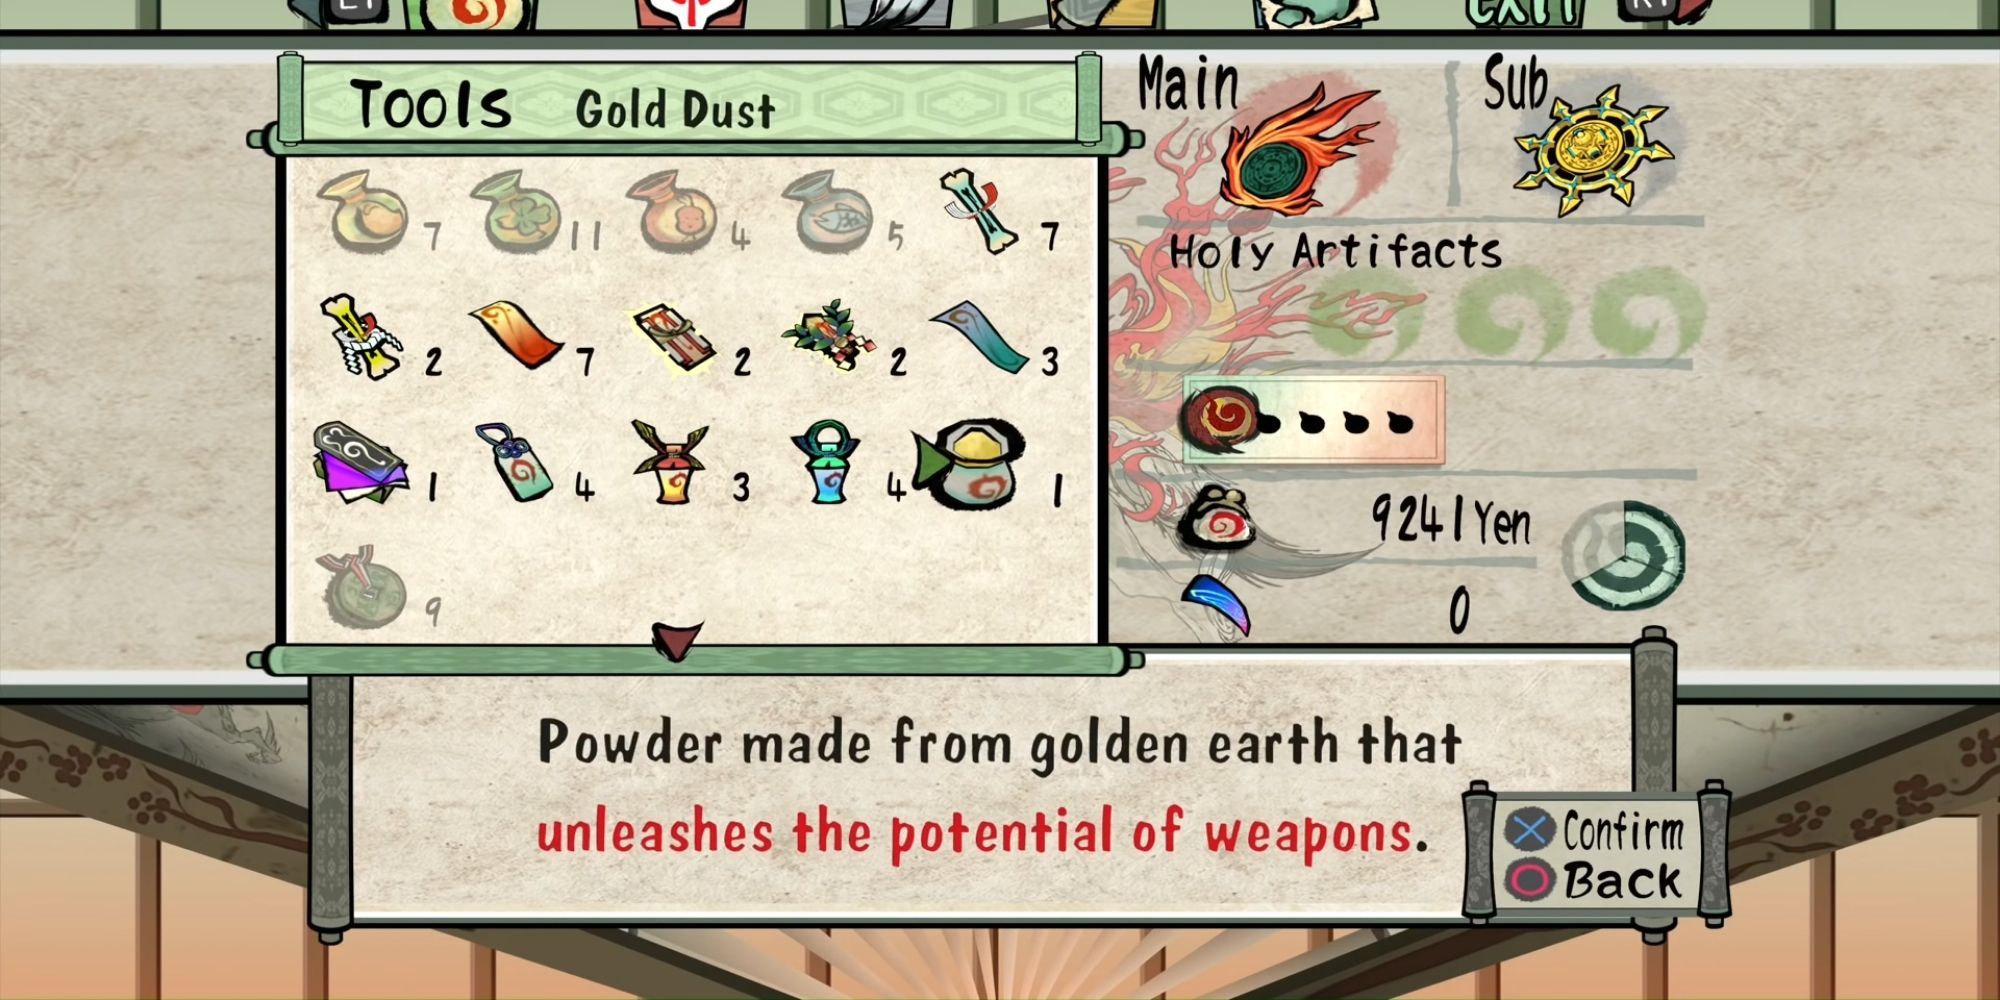 In Okami, Gold Dust is used to upgrade weapons to make them more powerful